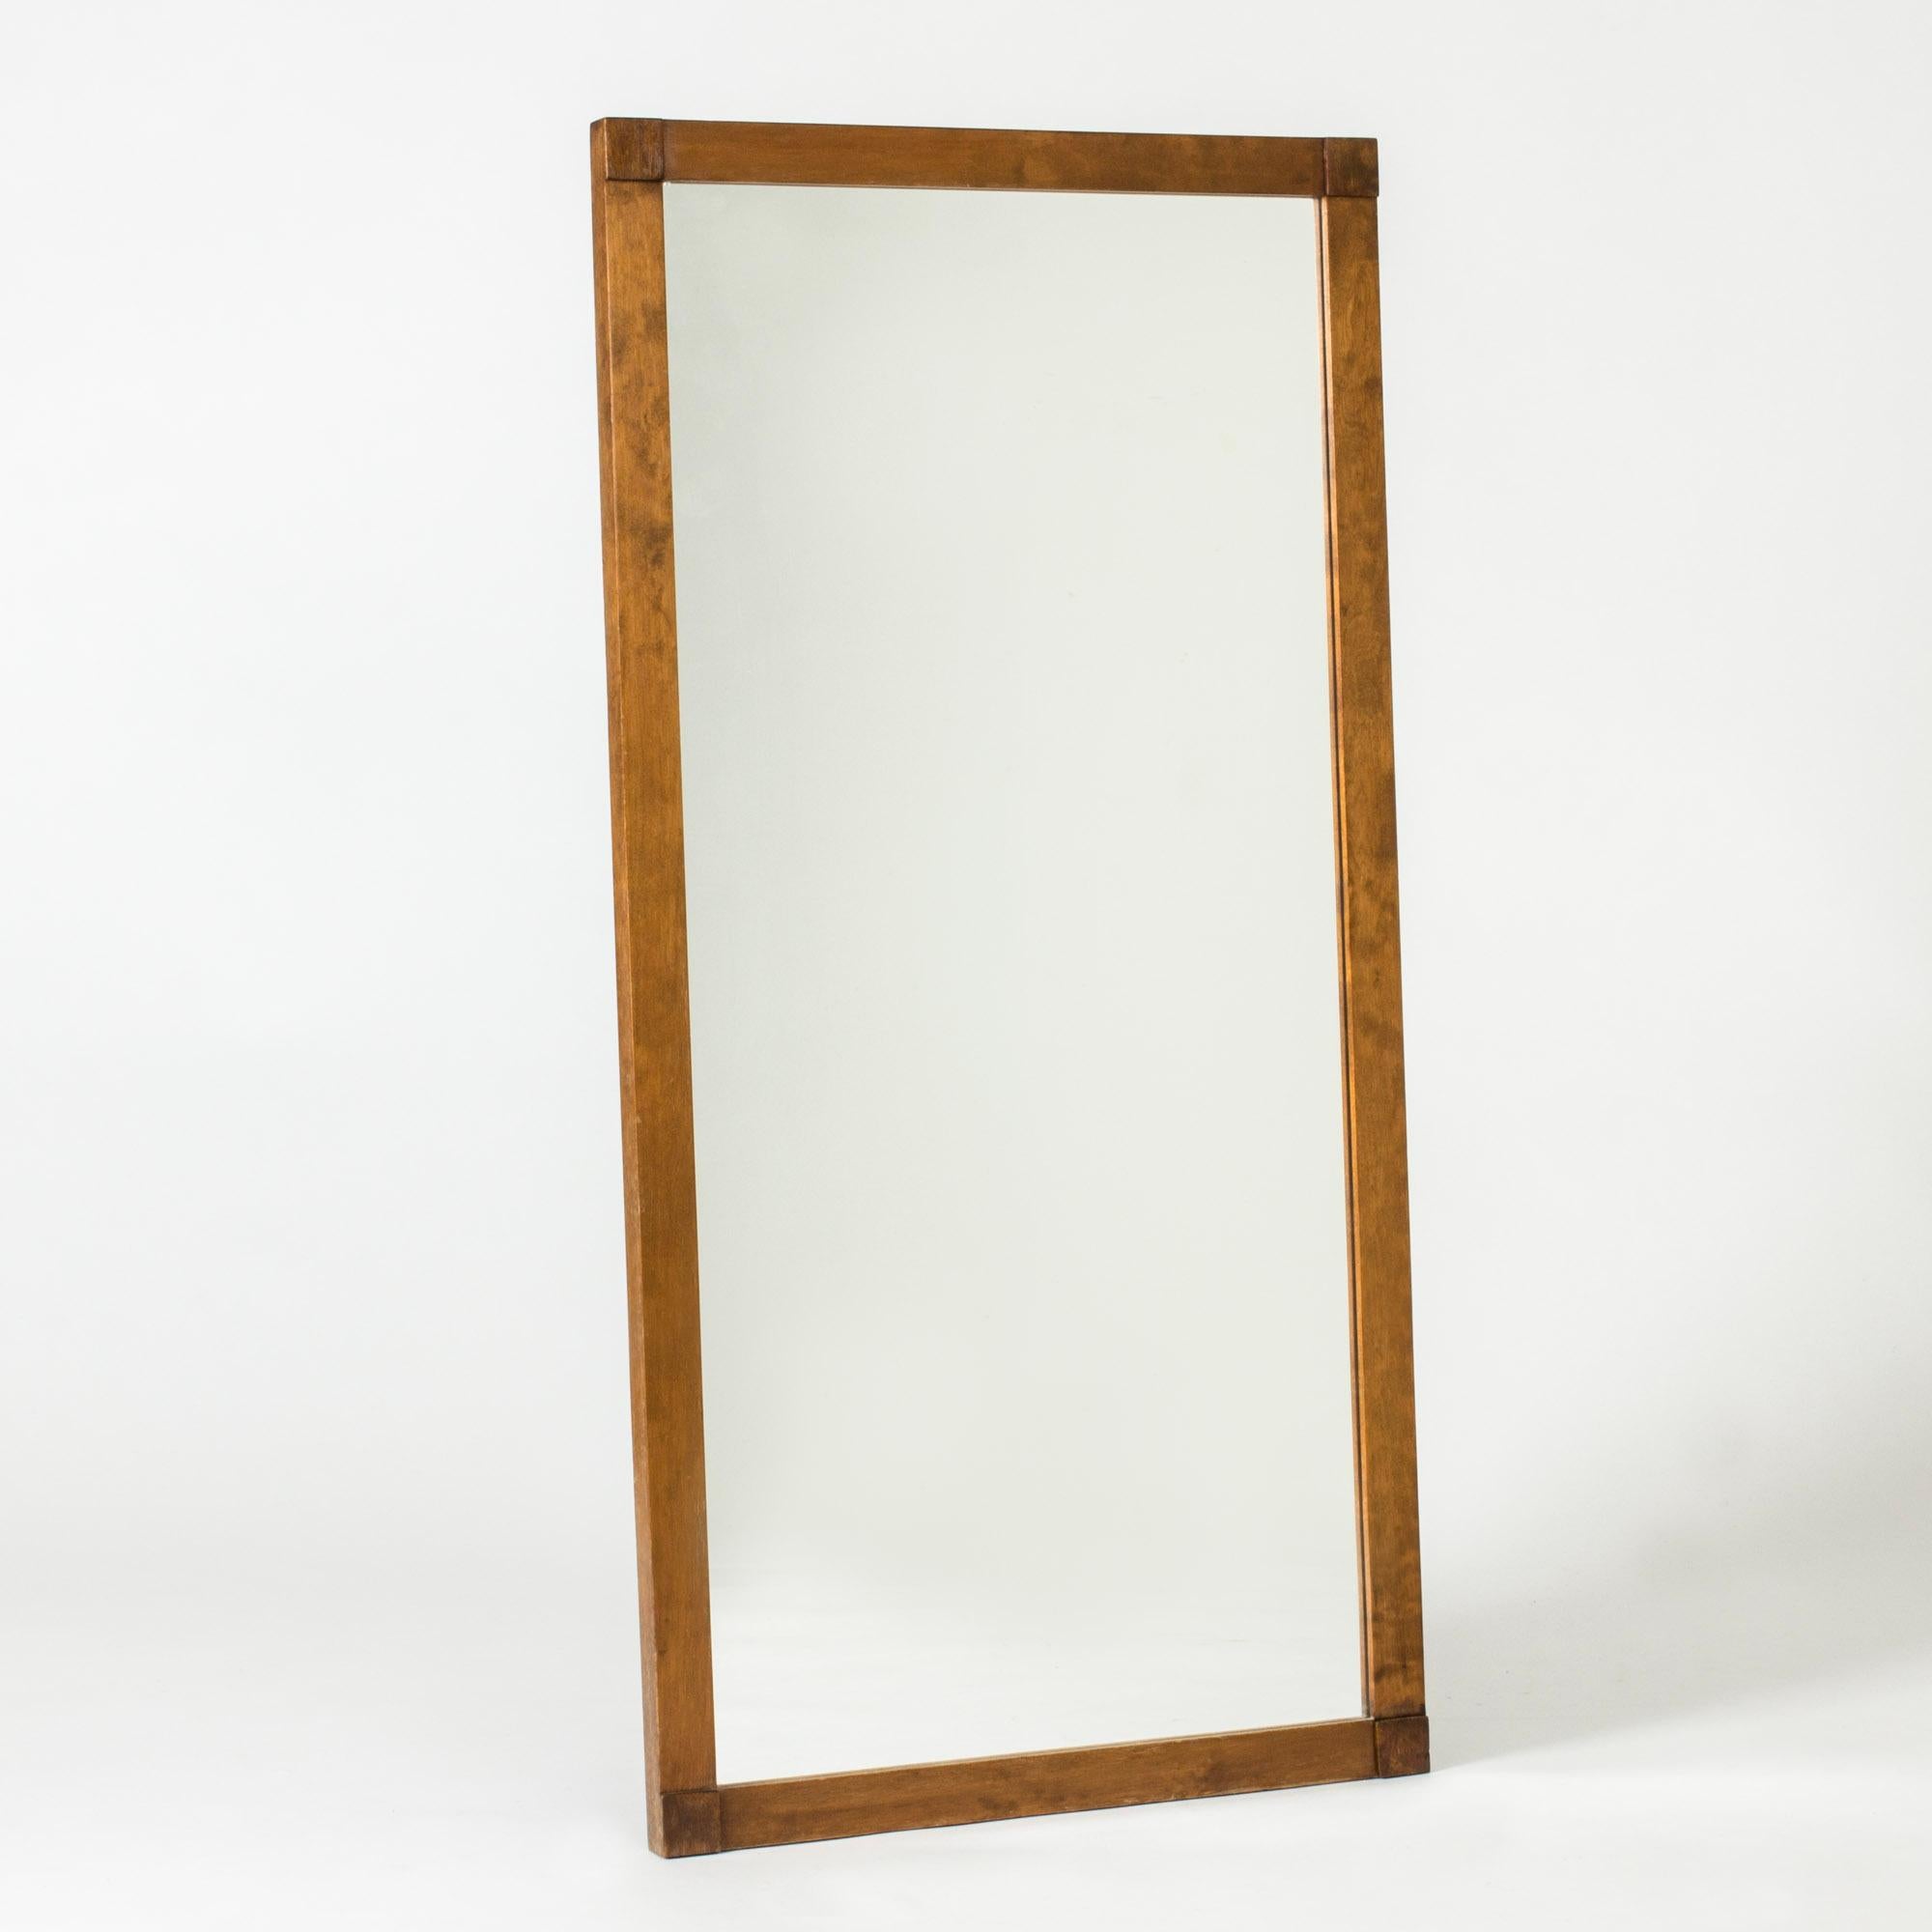 Scandinavian Modern Mid-Century Stockholm Exhibition Wall Mirror by Axel Larsson, Sweden, 1930